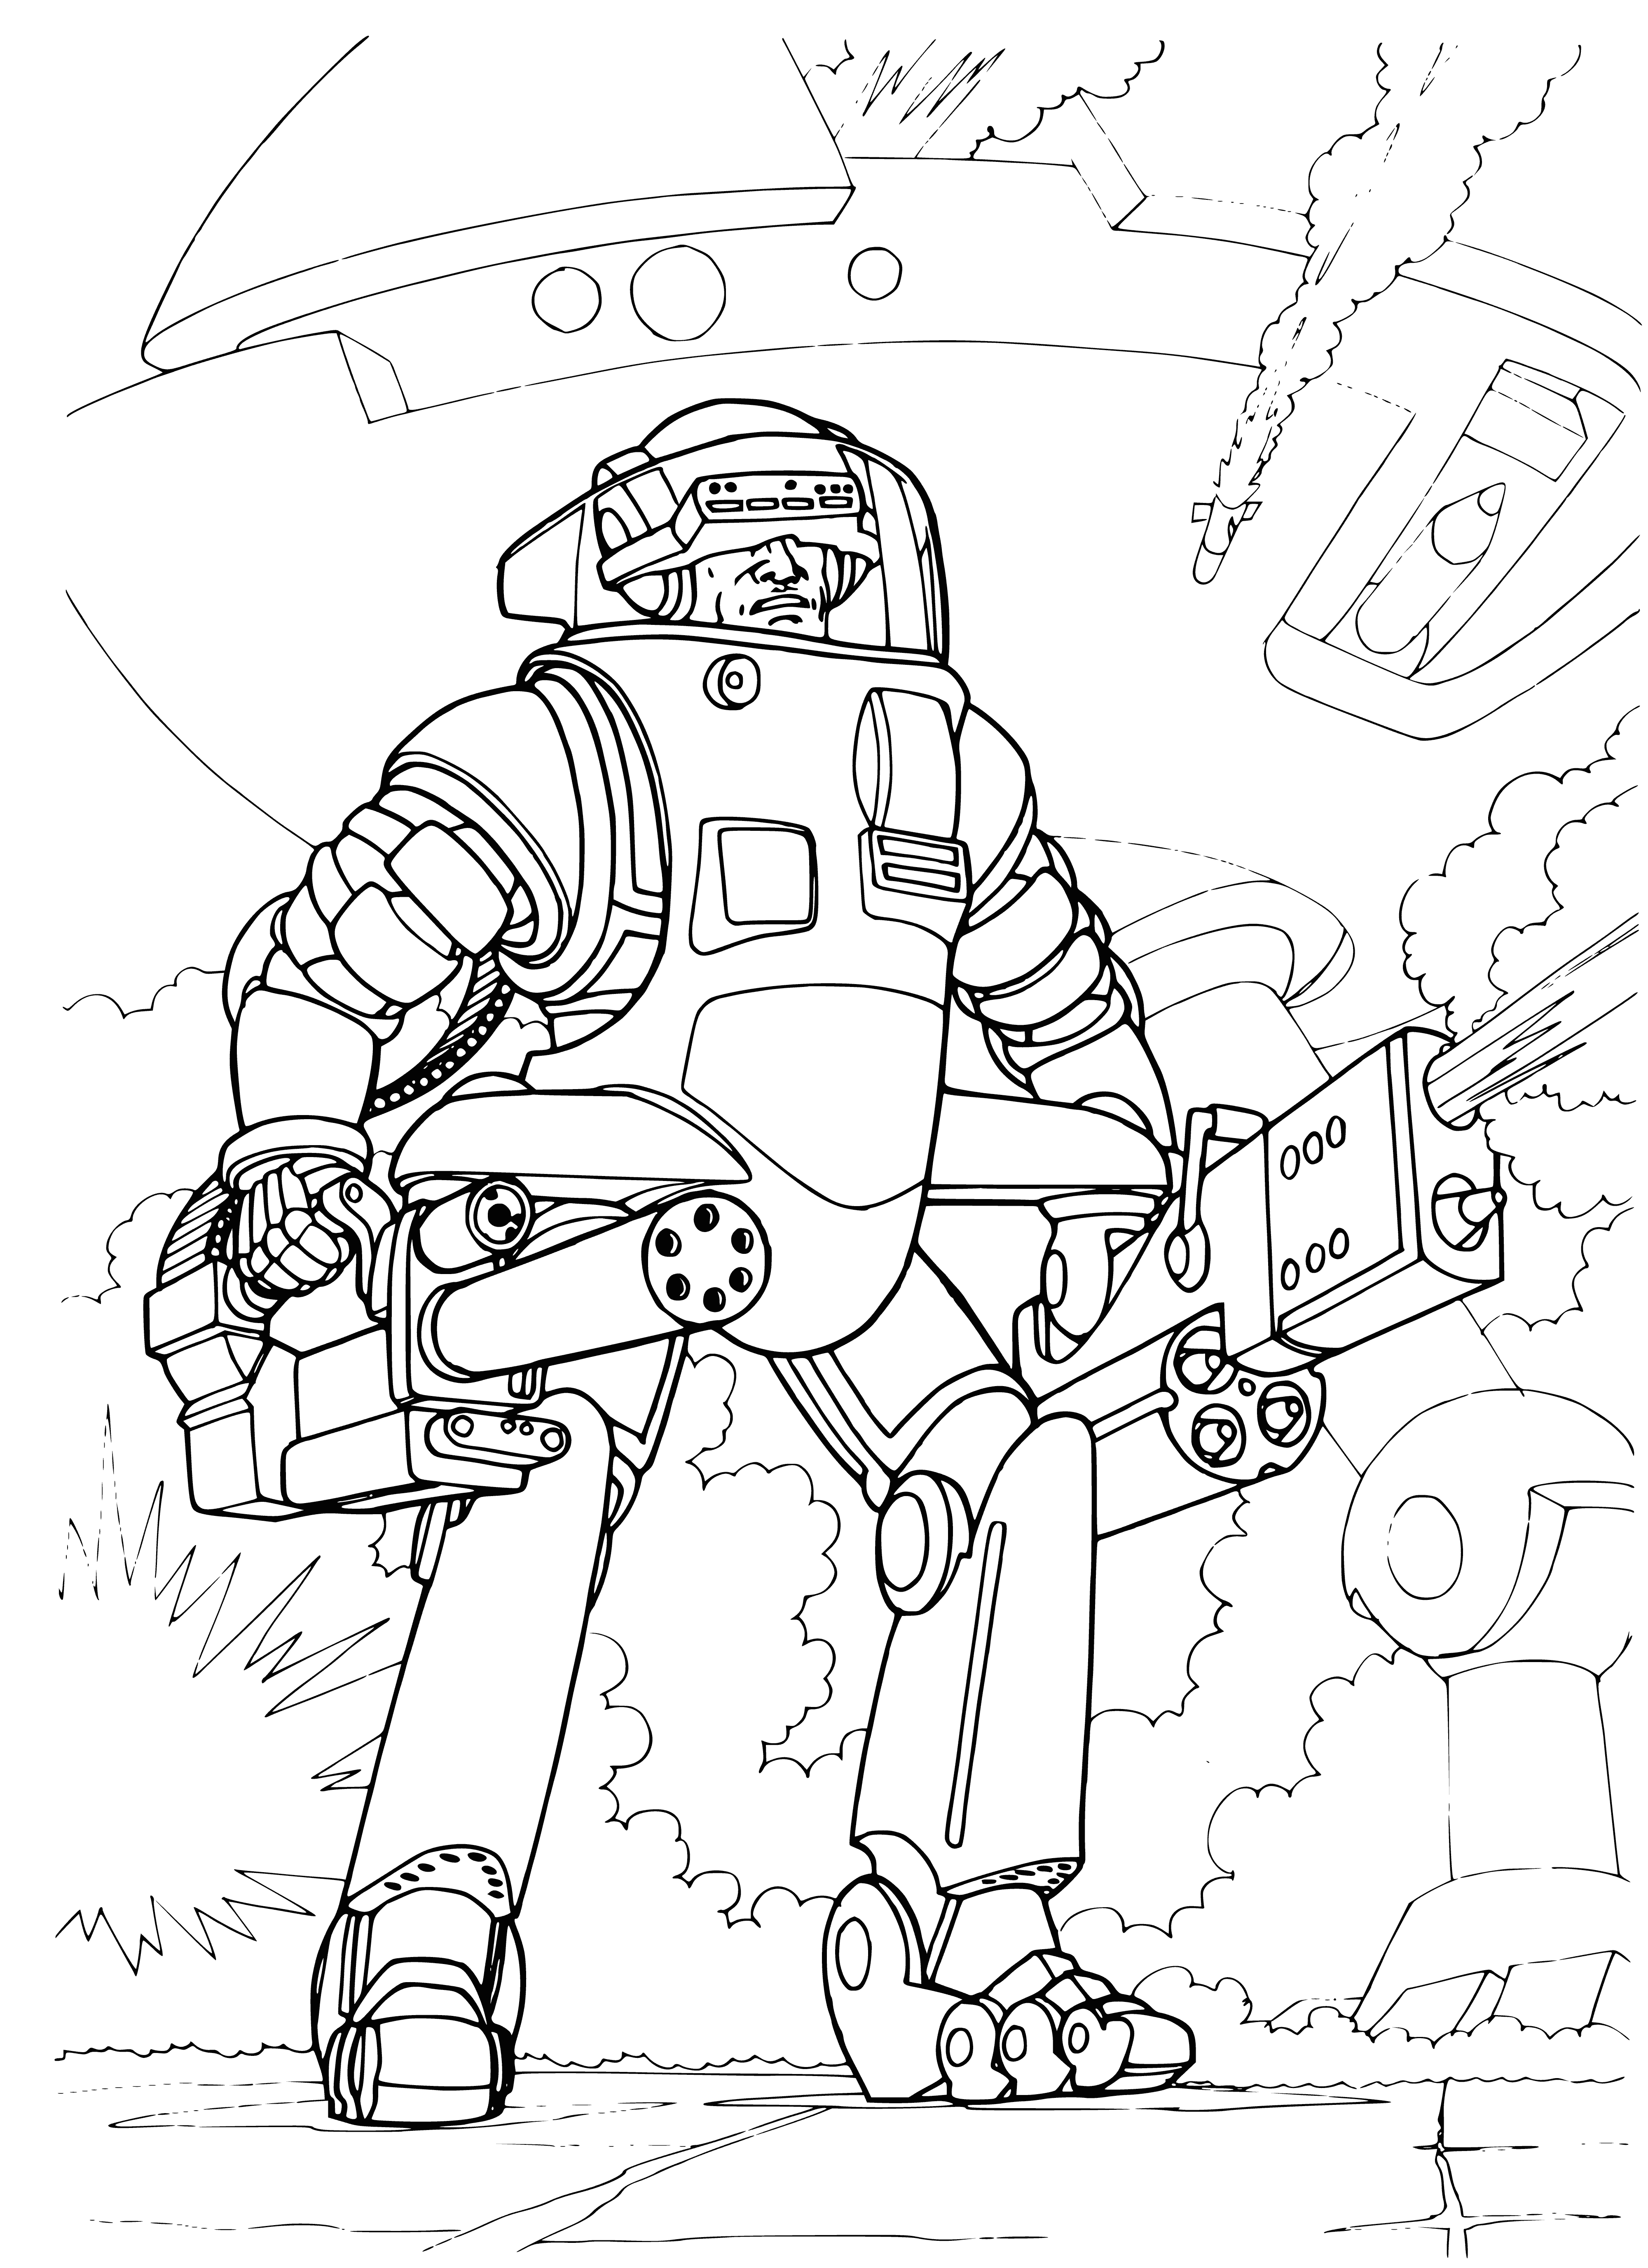 coloring page: Future wars fought with heavily-armed and armored infantryman able to fight in close quarters and sustain lots of damage. #FutureOfWar